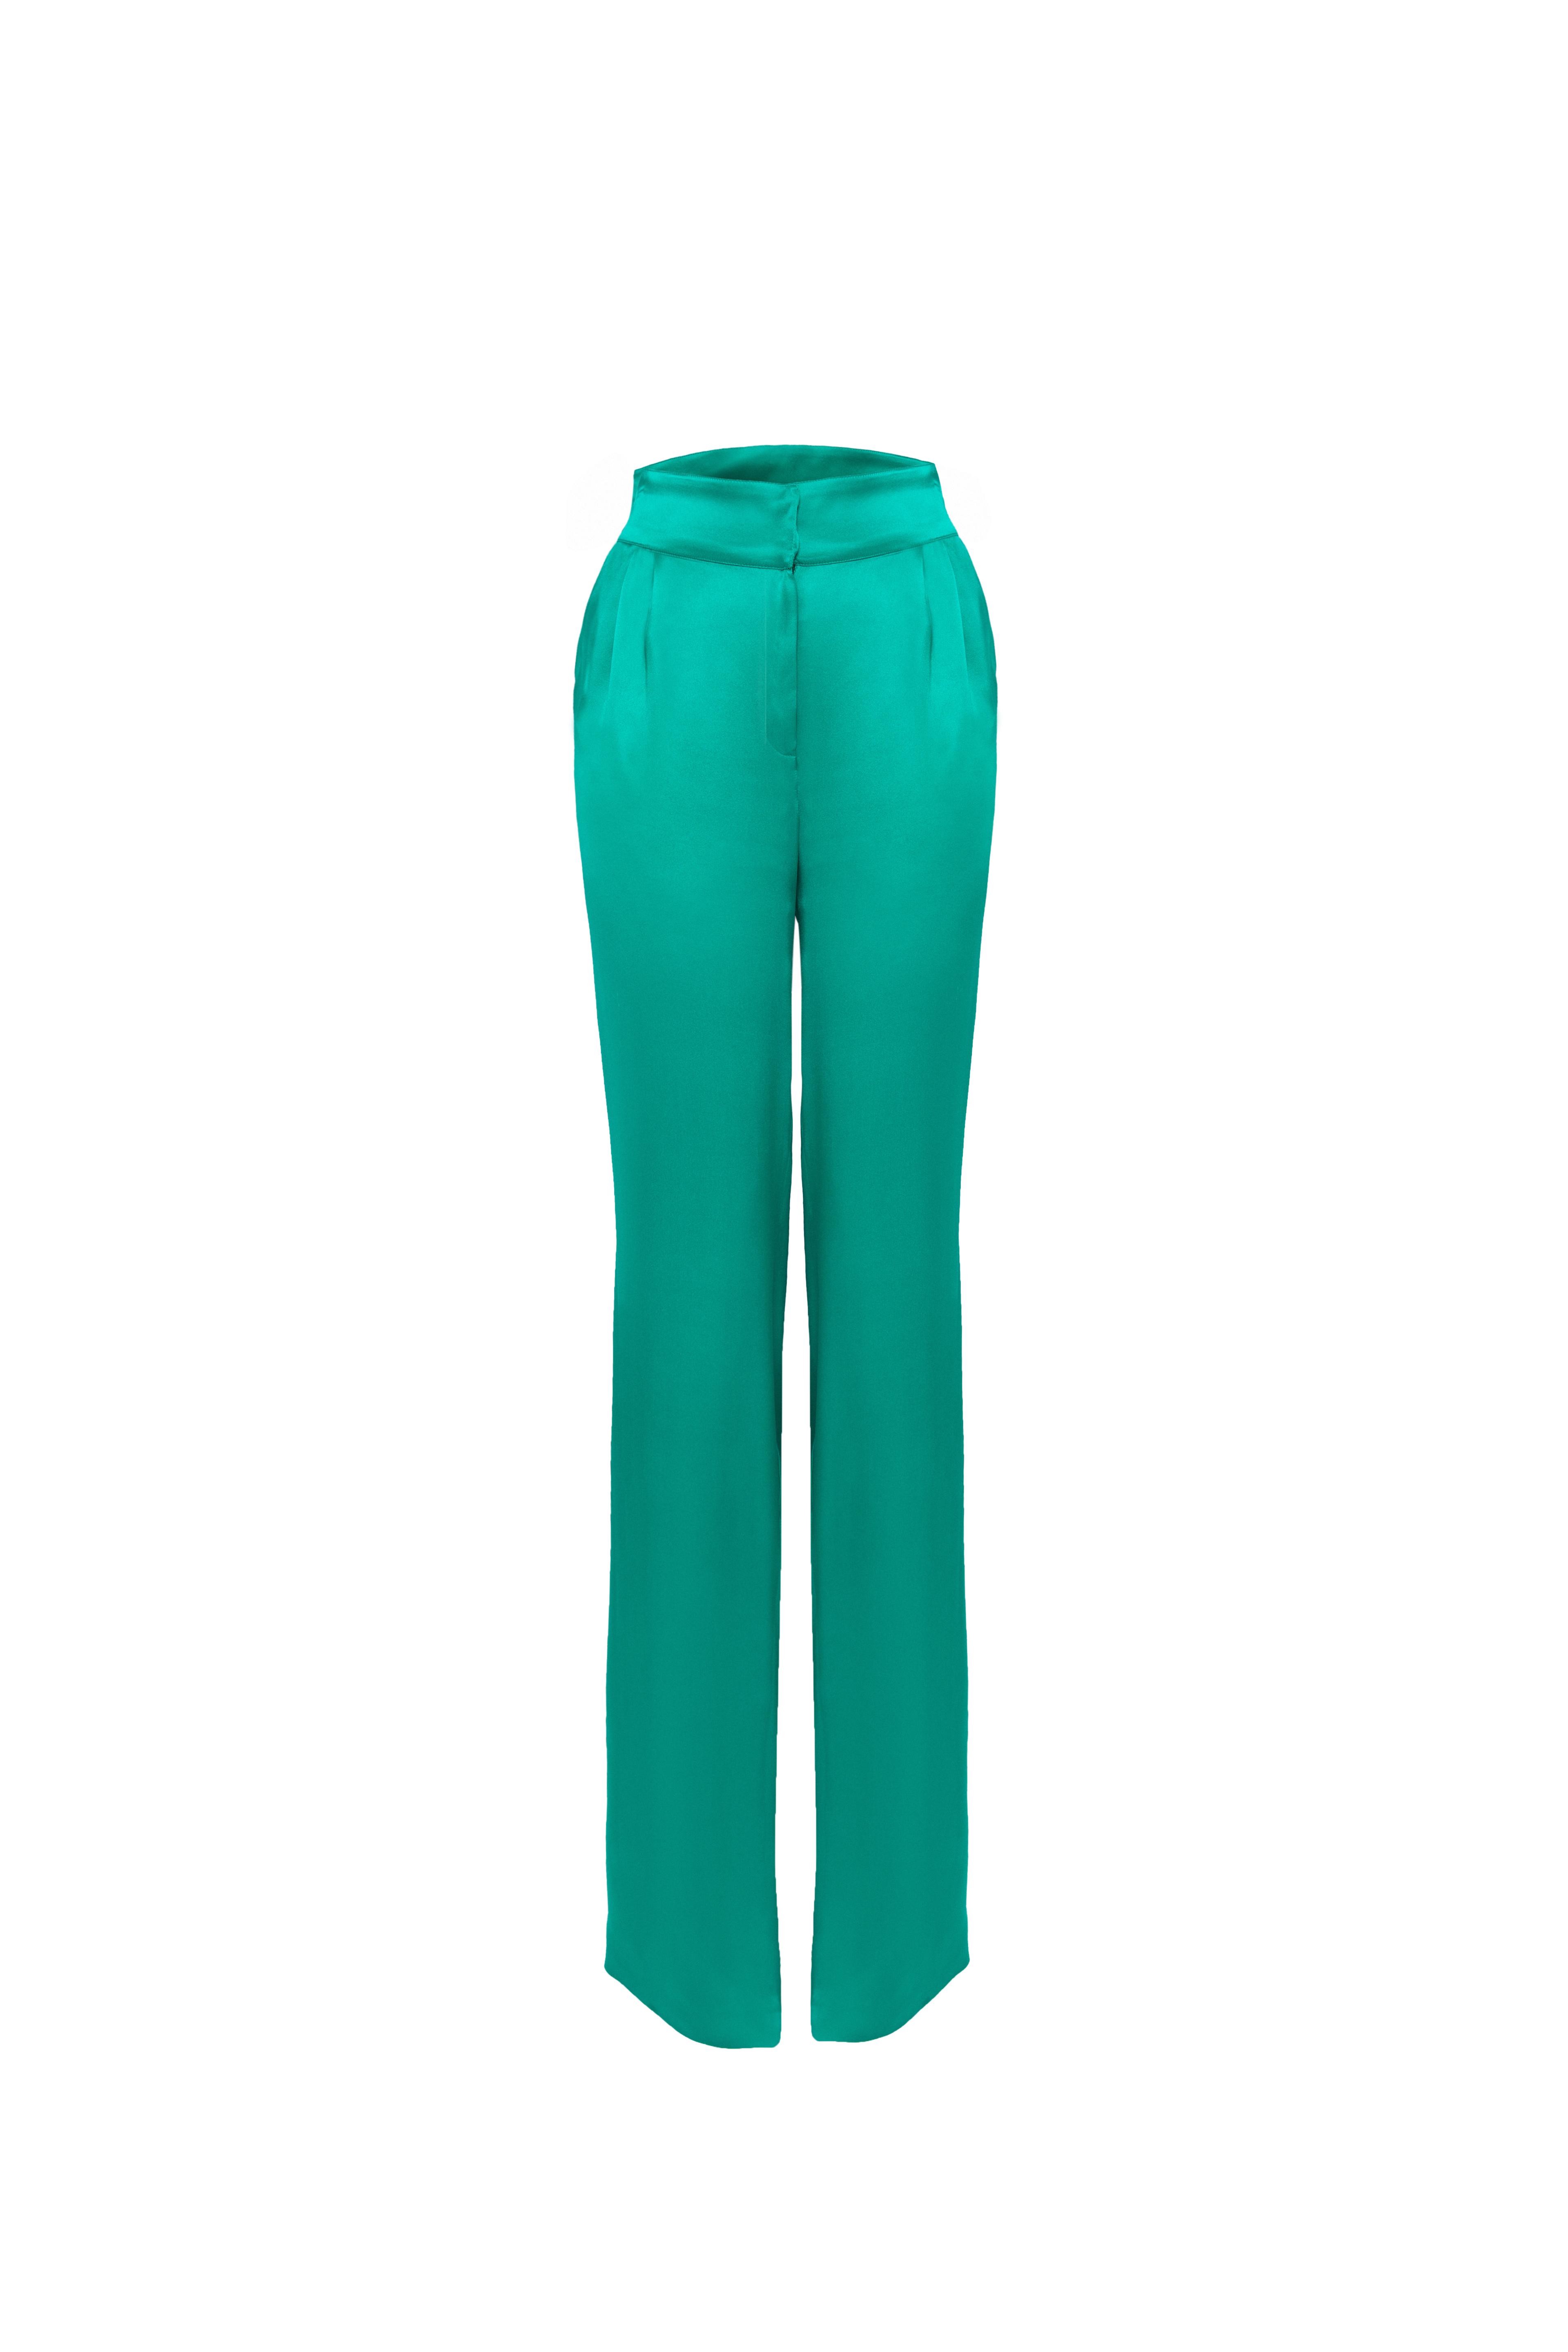 Vivien Limited Edition Trousers - Green